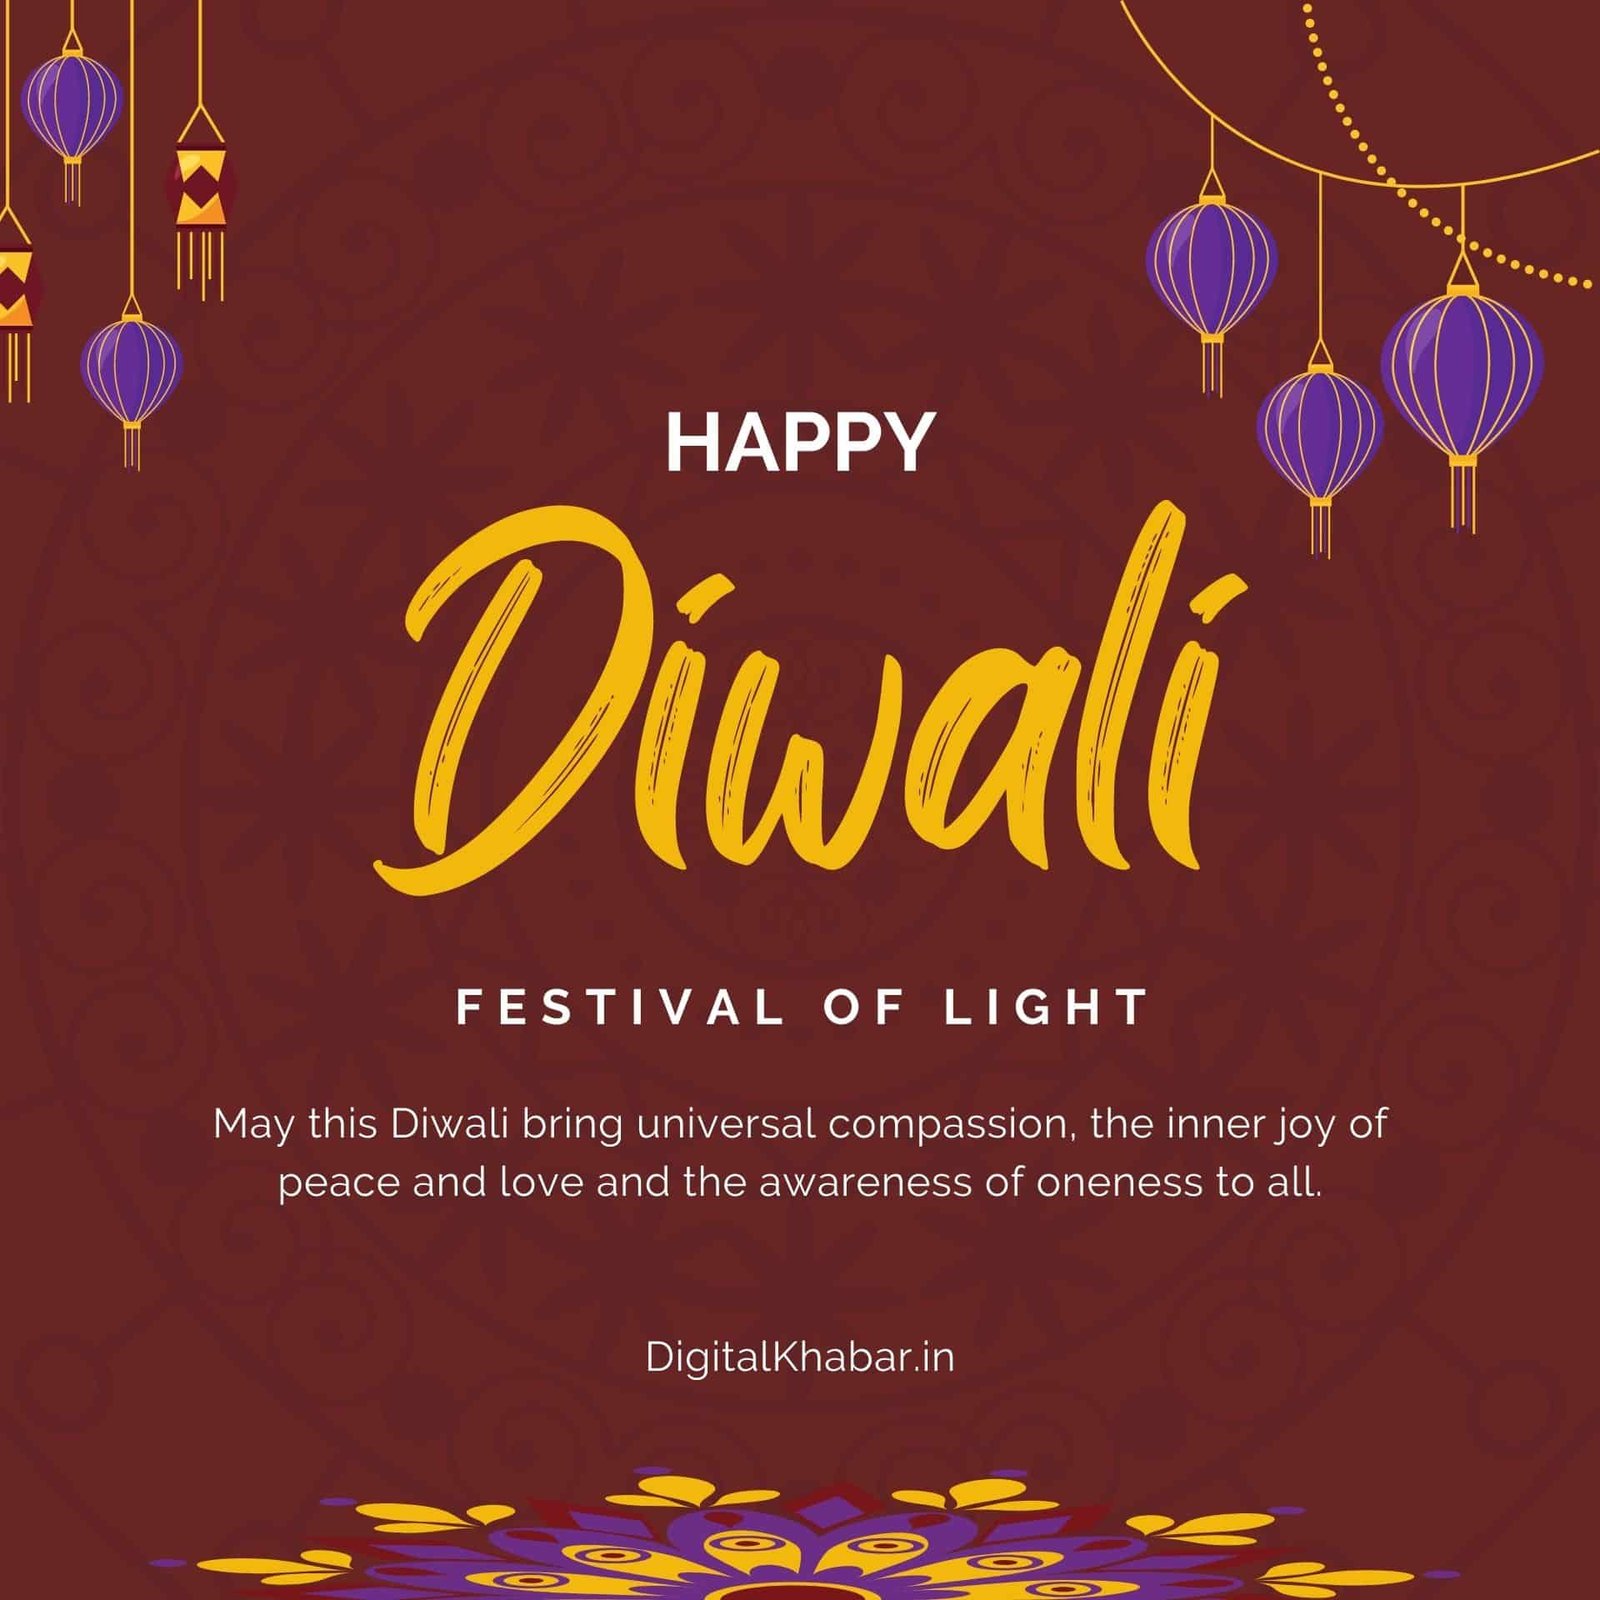 Unique Happy diwali images with quotes for whatsapp